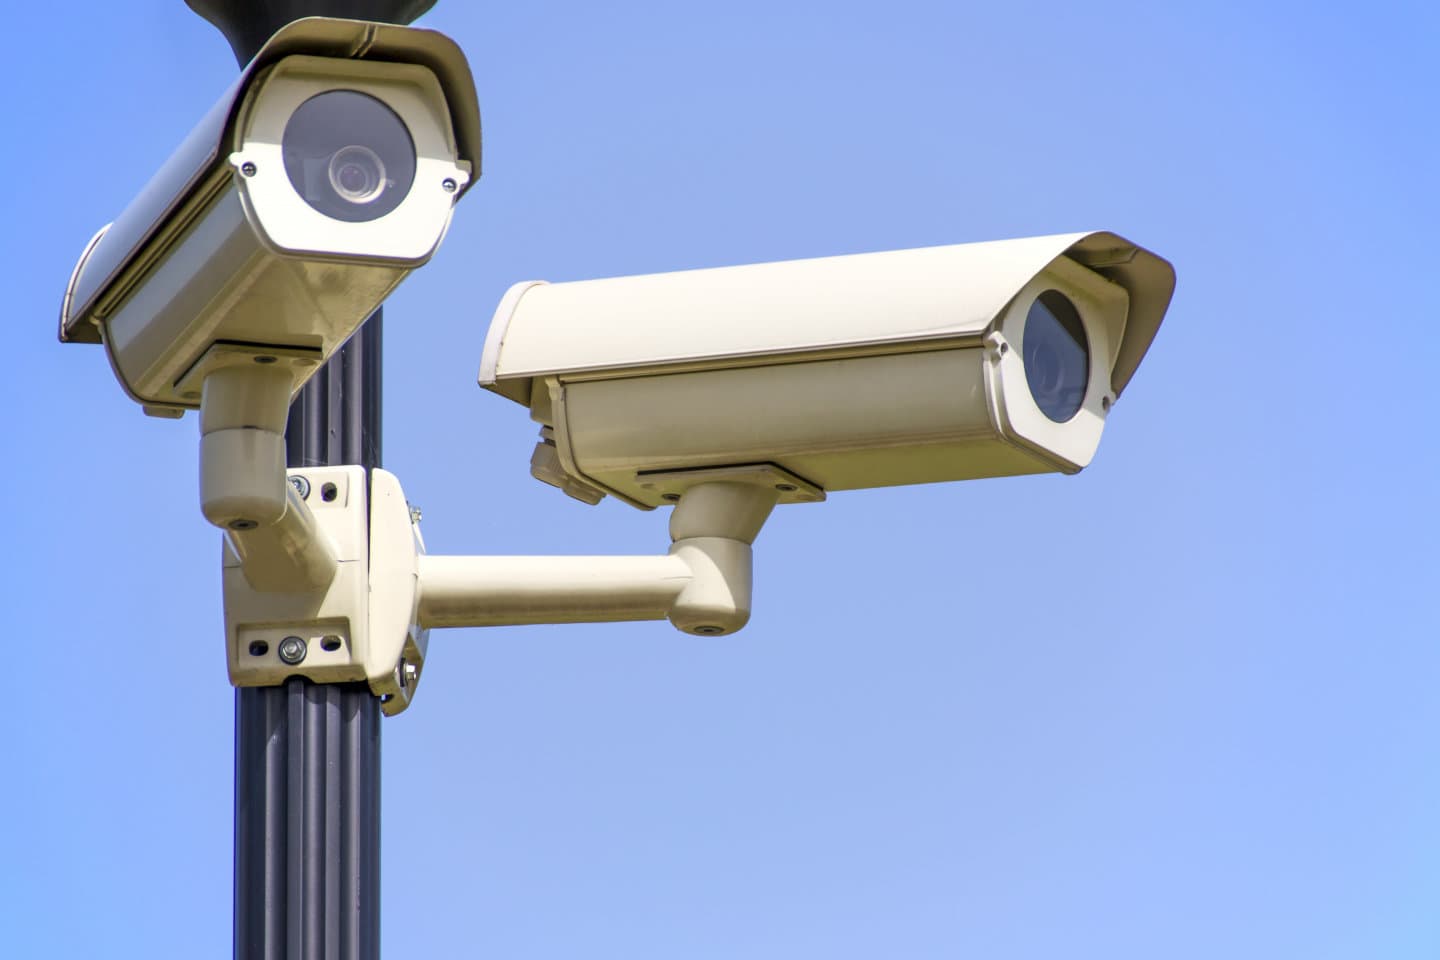 Surveillance cameras are shown mounted high on a pole.